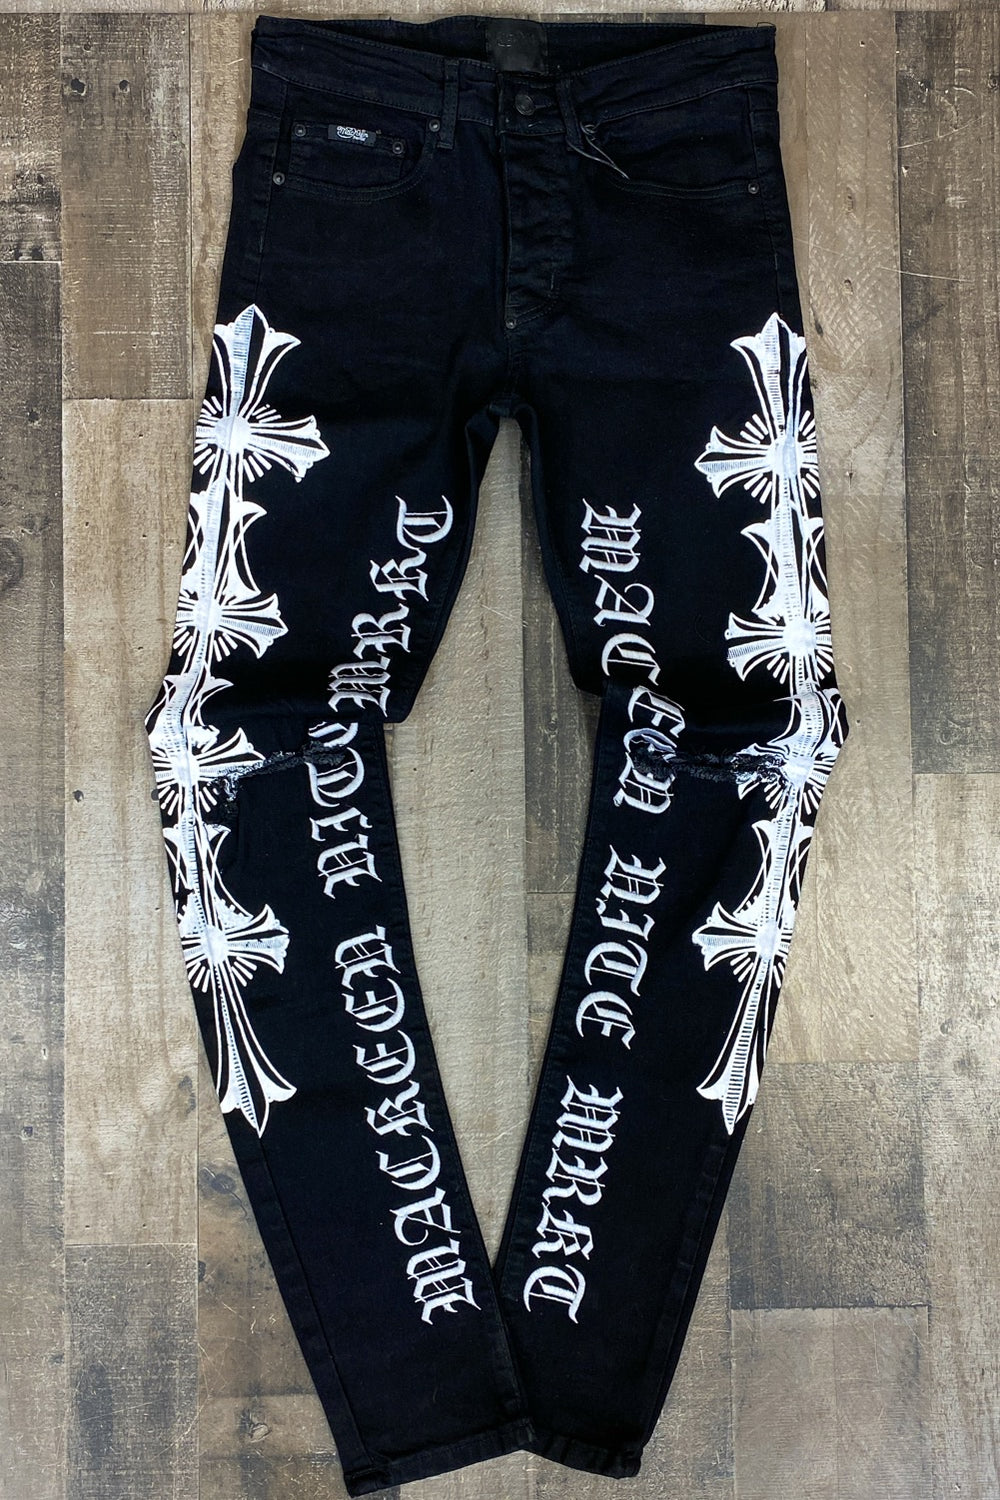 Mackeen- Lang embroidered jeans